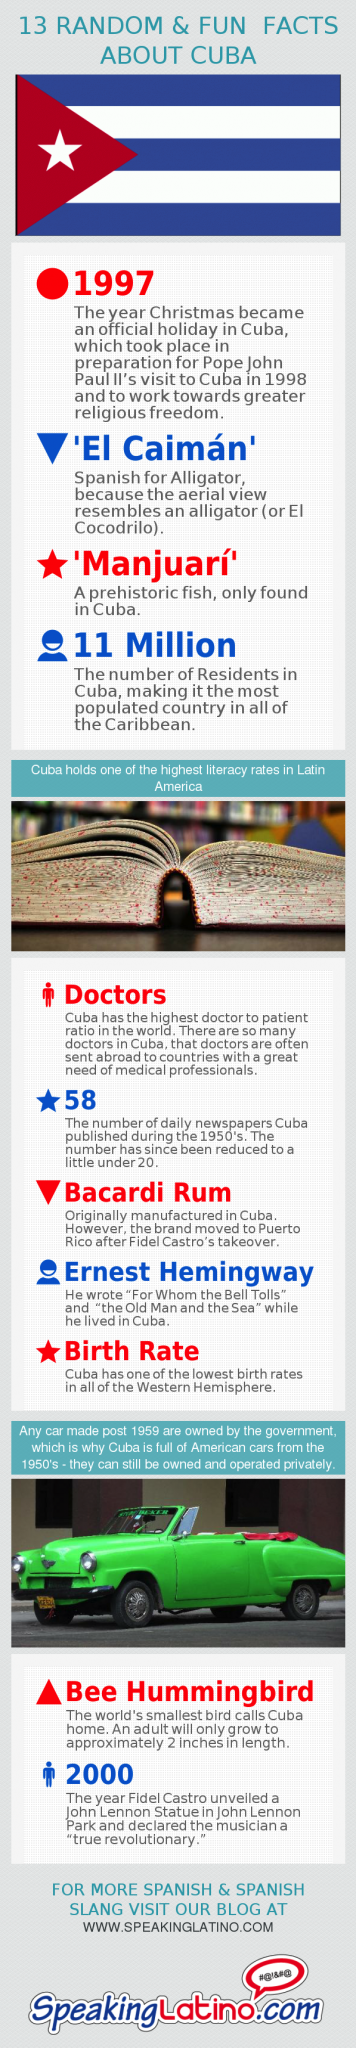 Infographic 13 Random Fun Facts About Cuba